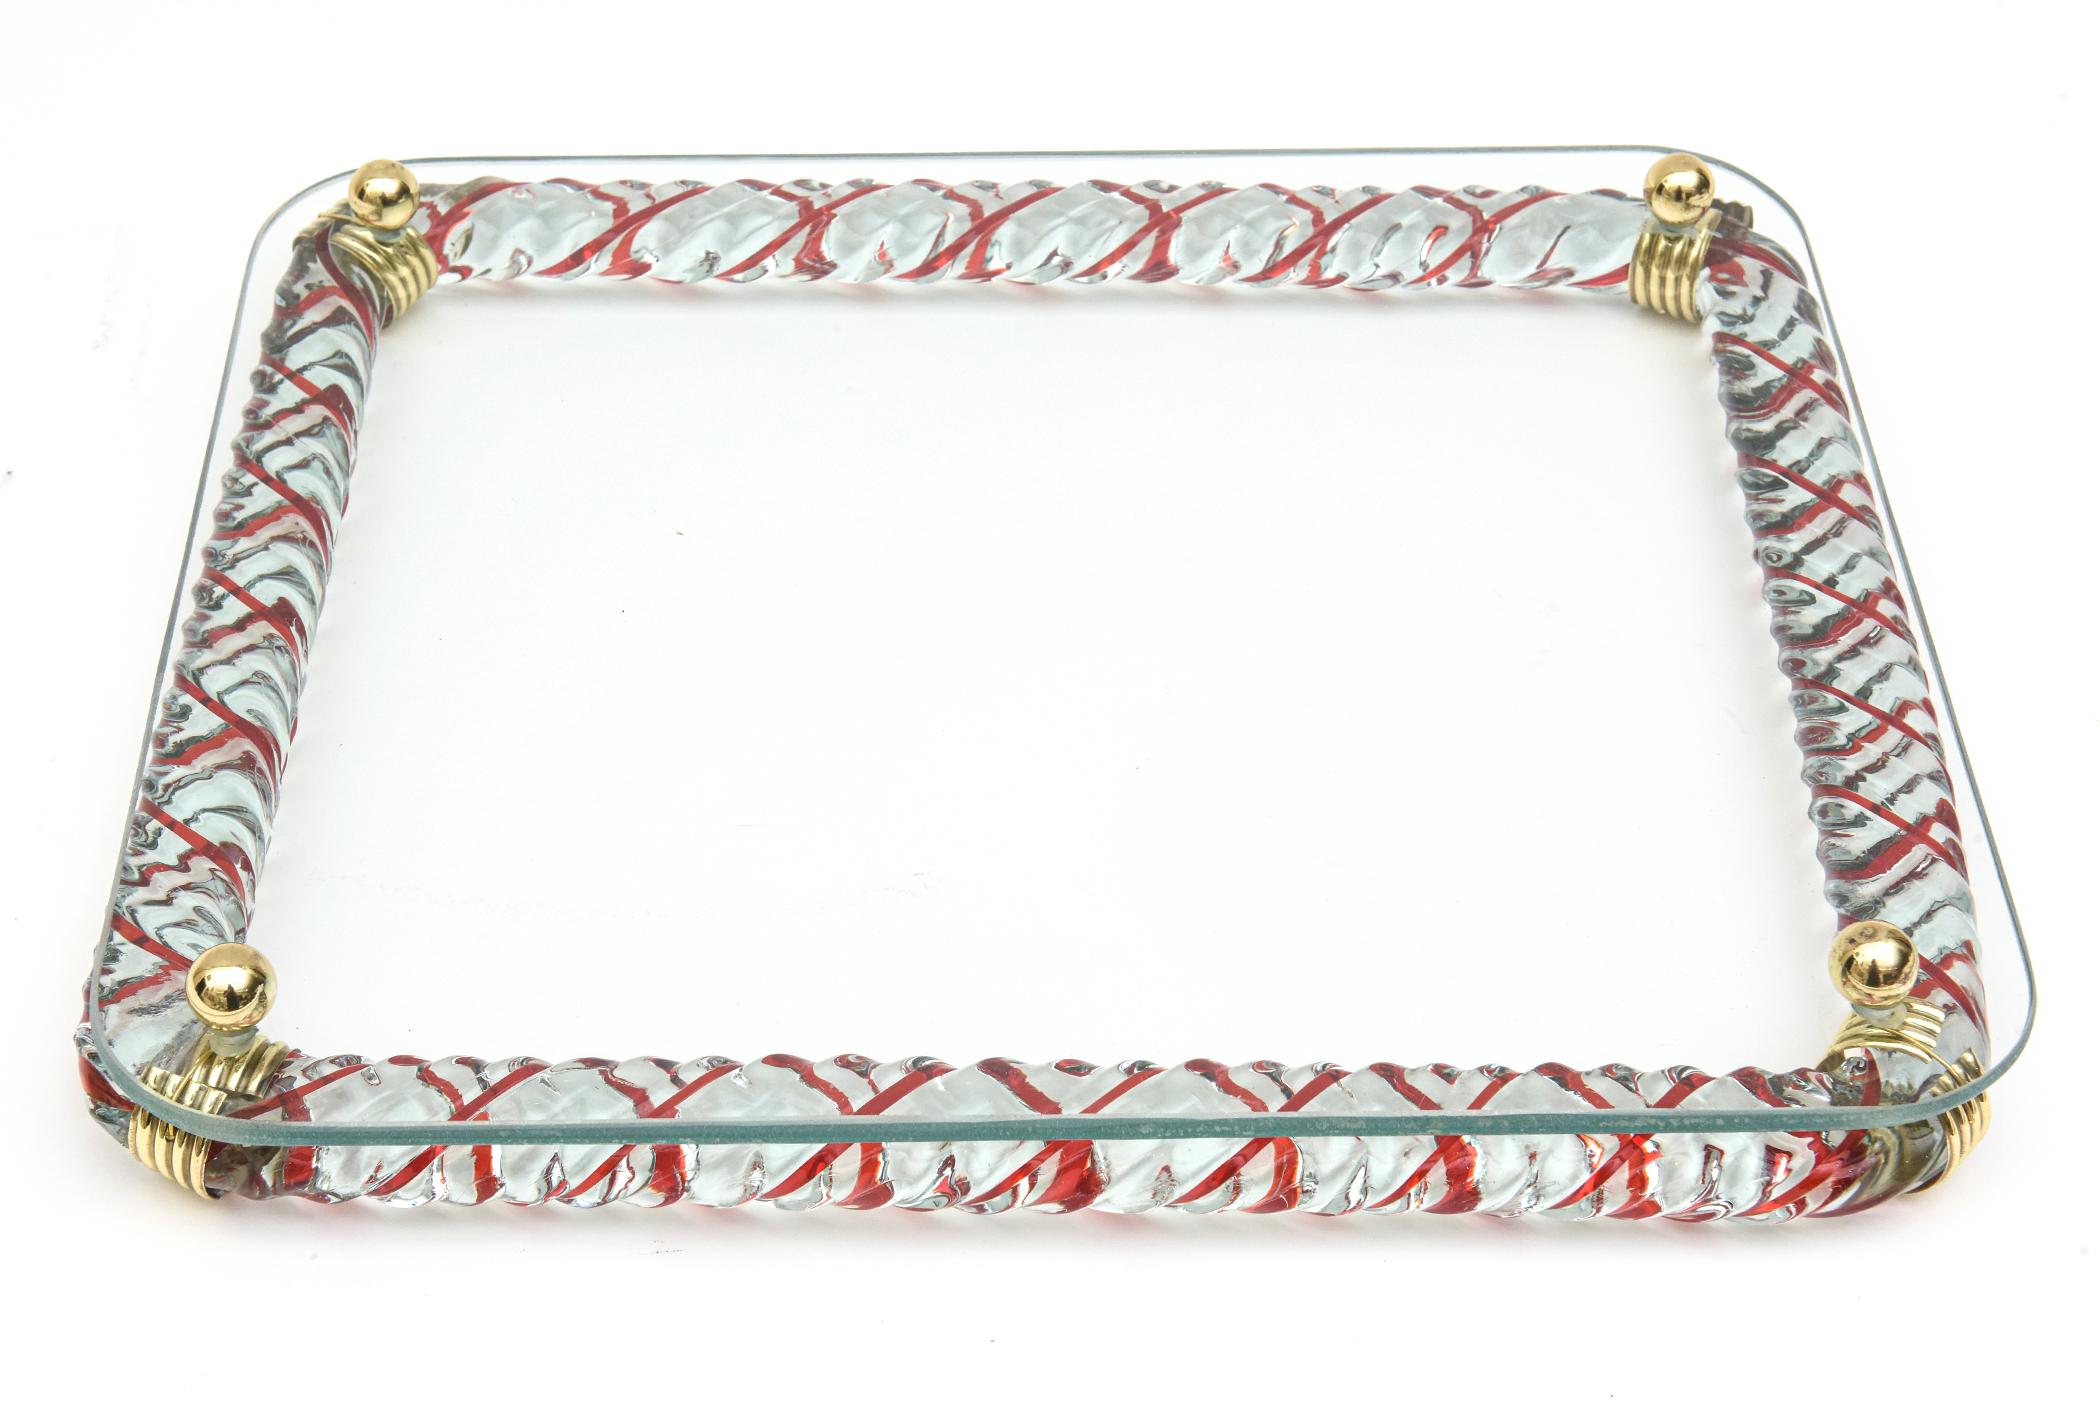 Murano Venini Red Caned Twisted Rope Glass Tray with Brass Mid-Century Modern For Sale 2